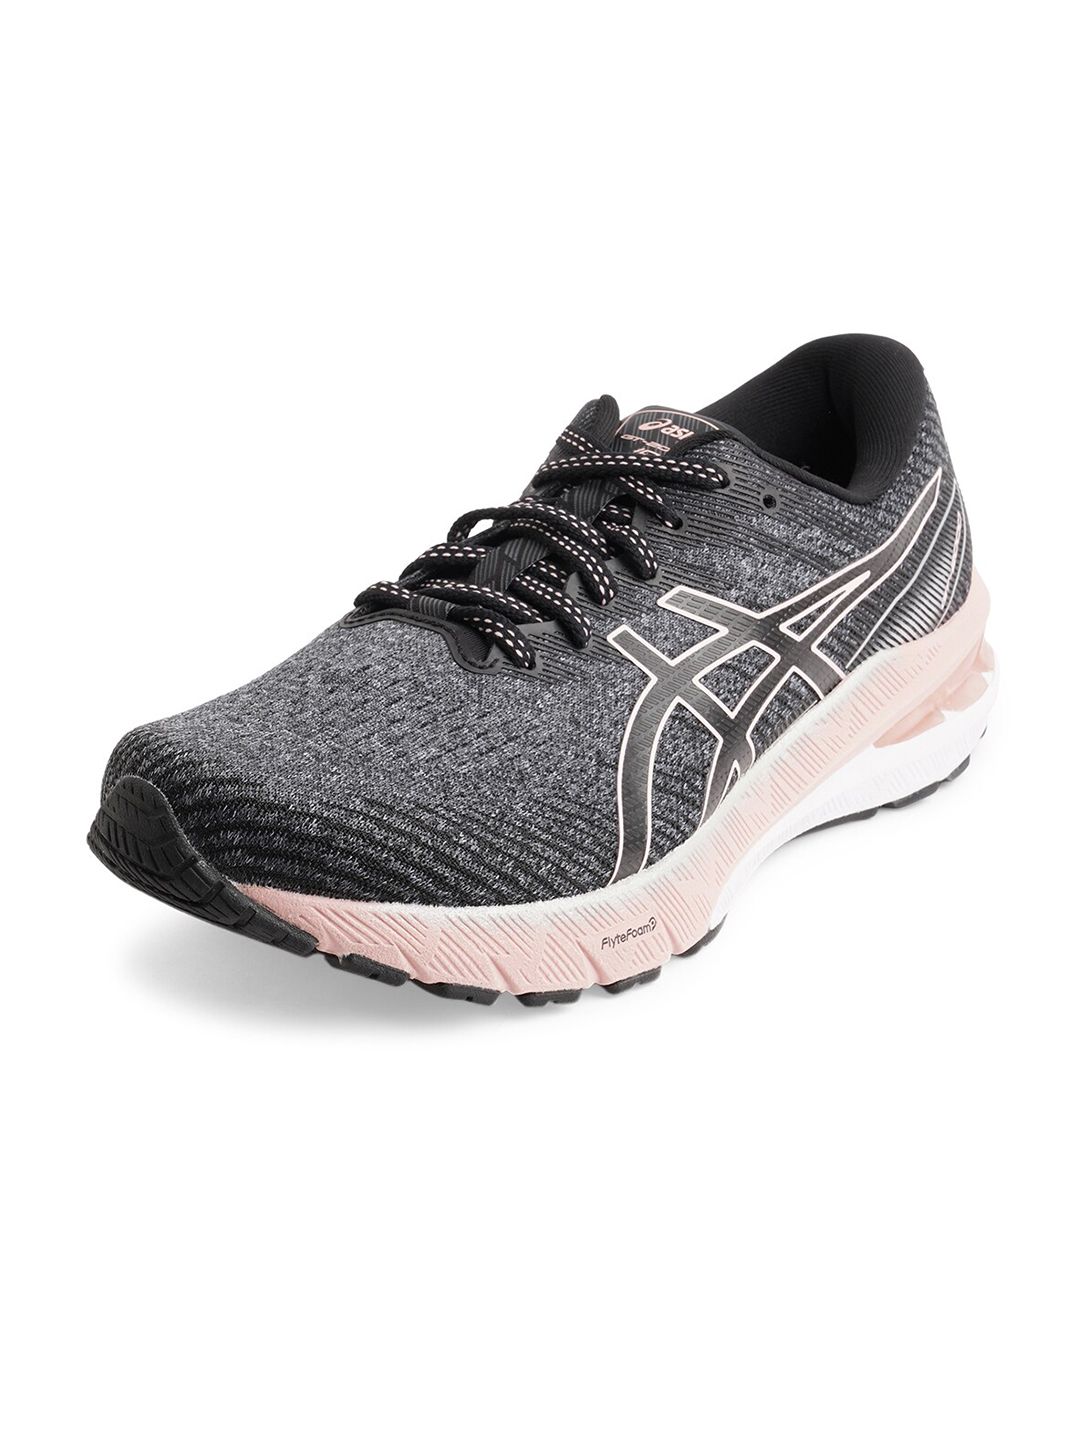 ASICS Women Grey GT-2000 10 Running Shoes Price in India